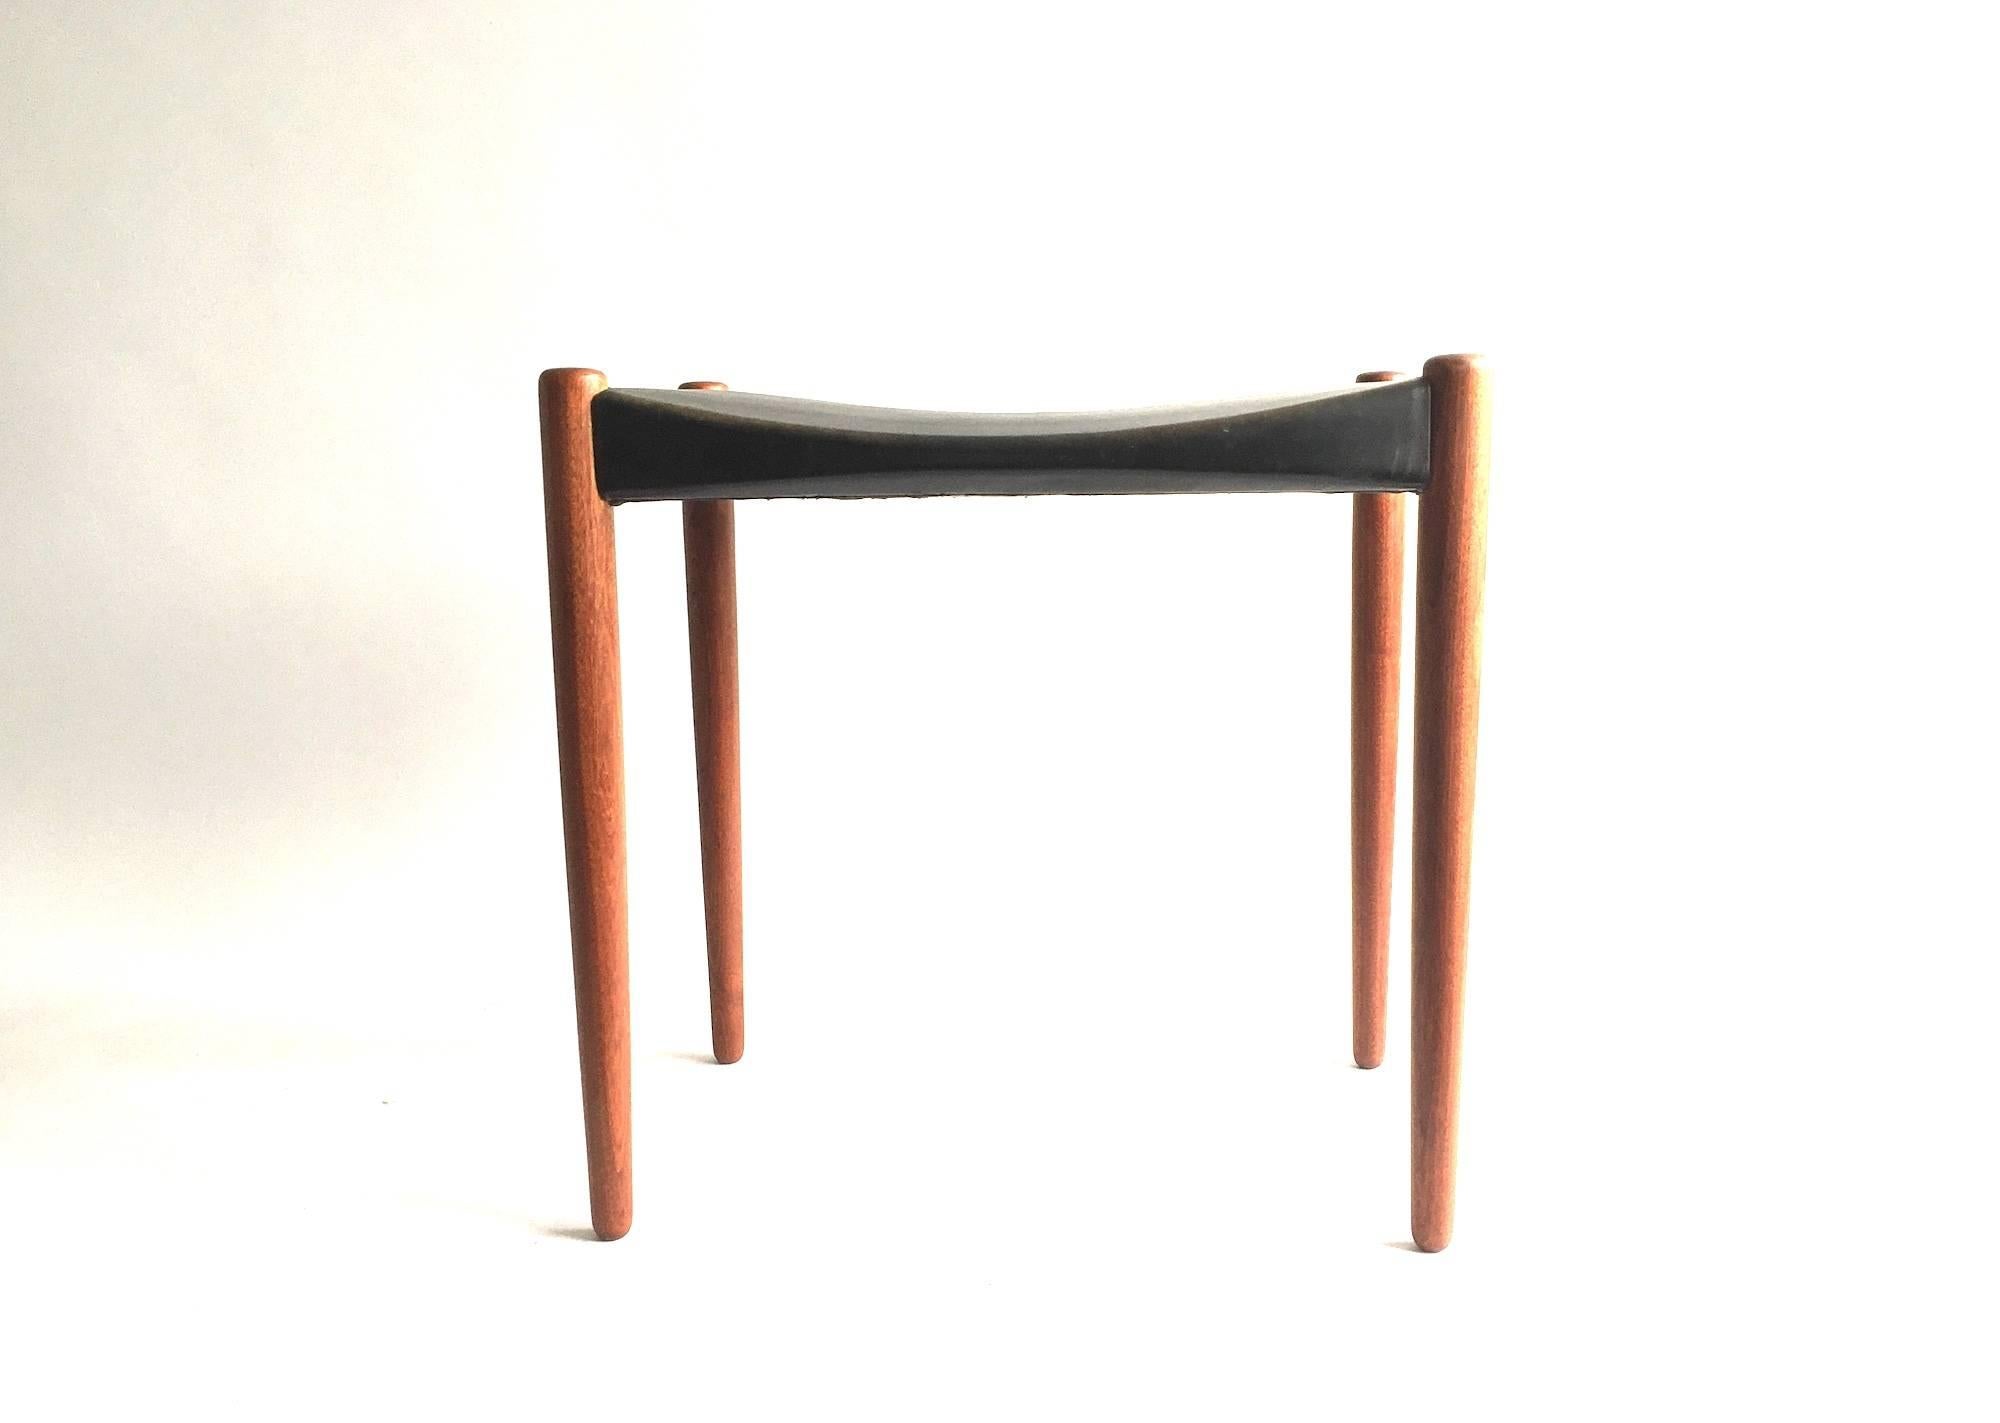 Ejner Larsen (1917-1987),
Aksel Bender Madsen (1916-2000).

Solid mahogany side chair-height stool built by Danish master cabinetmaker Willy Beck. Original black leather is in fine original condition. Paper tag to underside. Designed 1950.